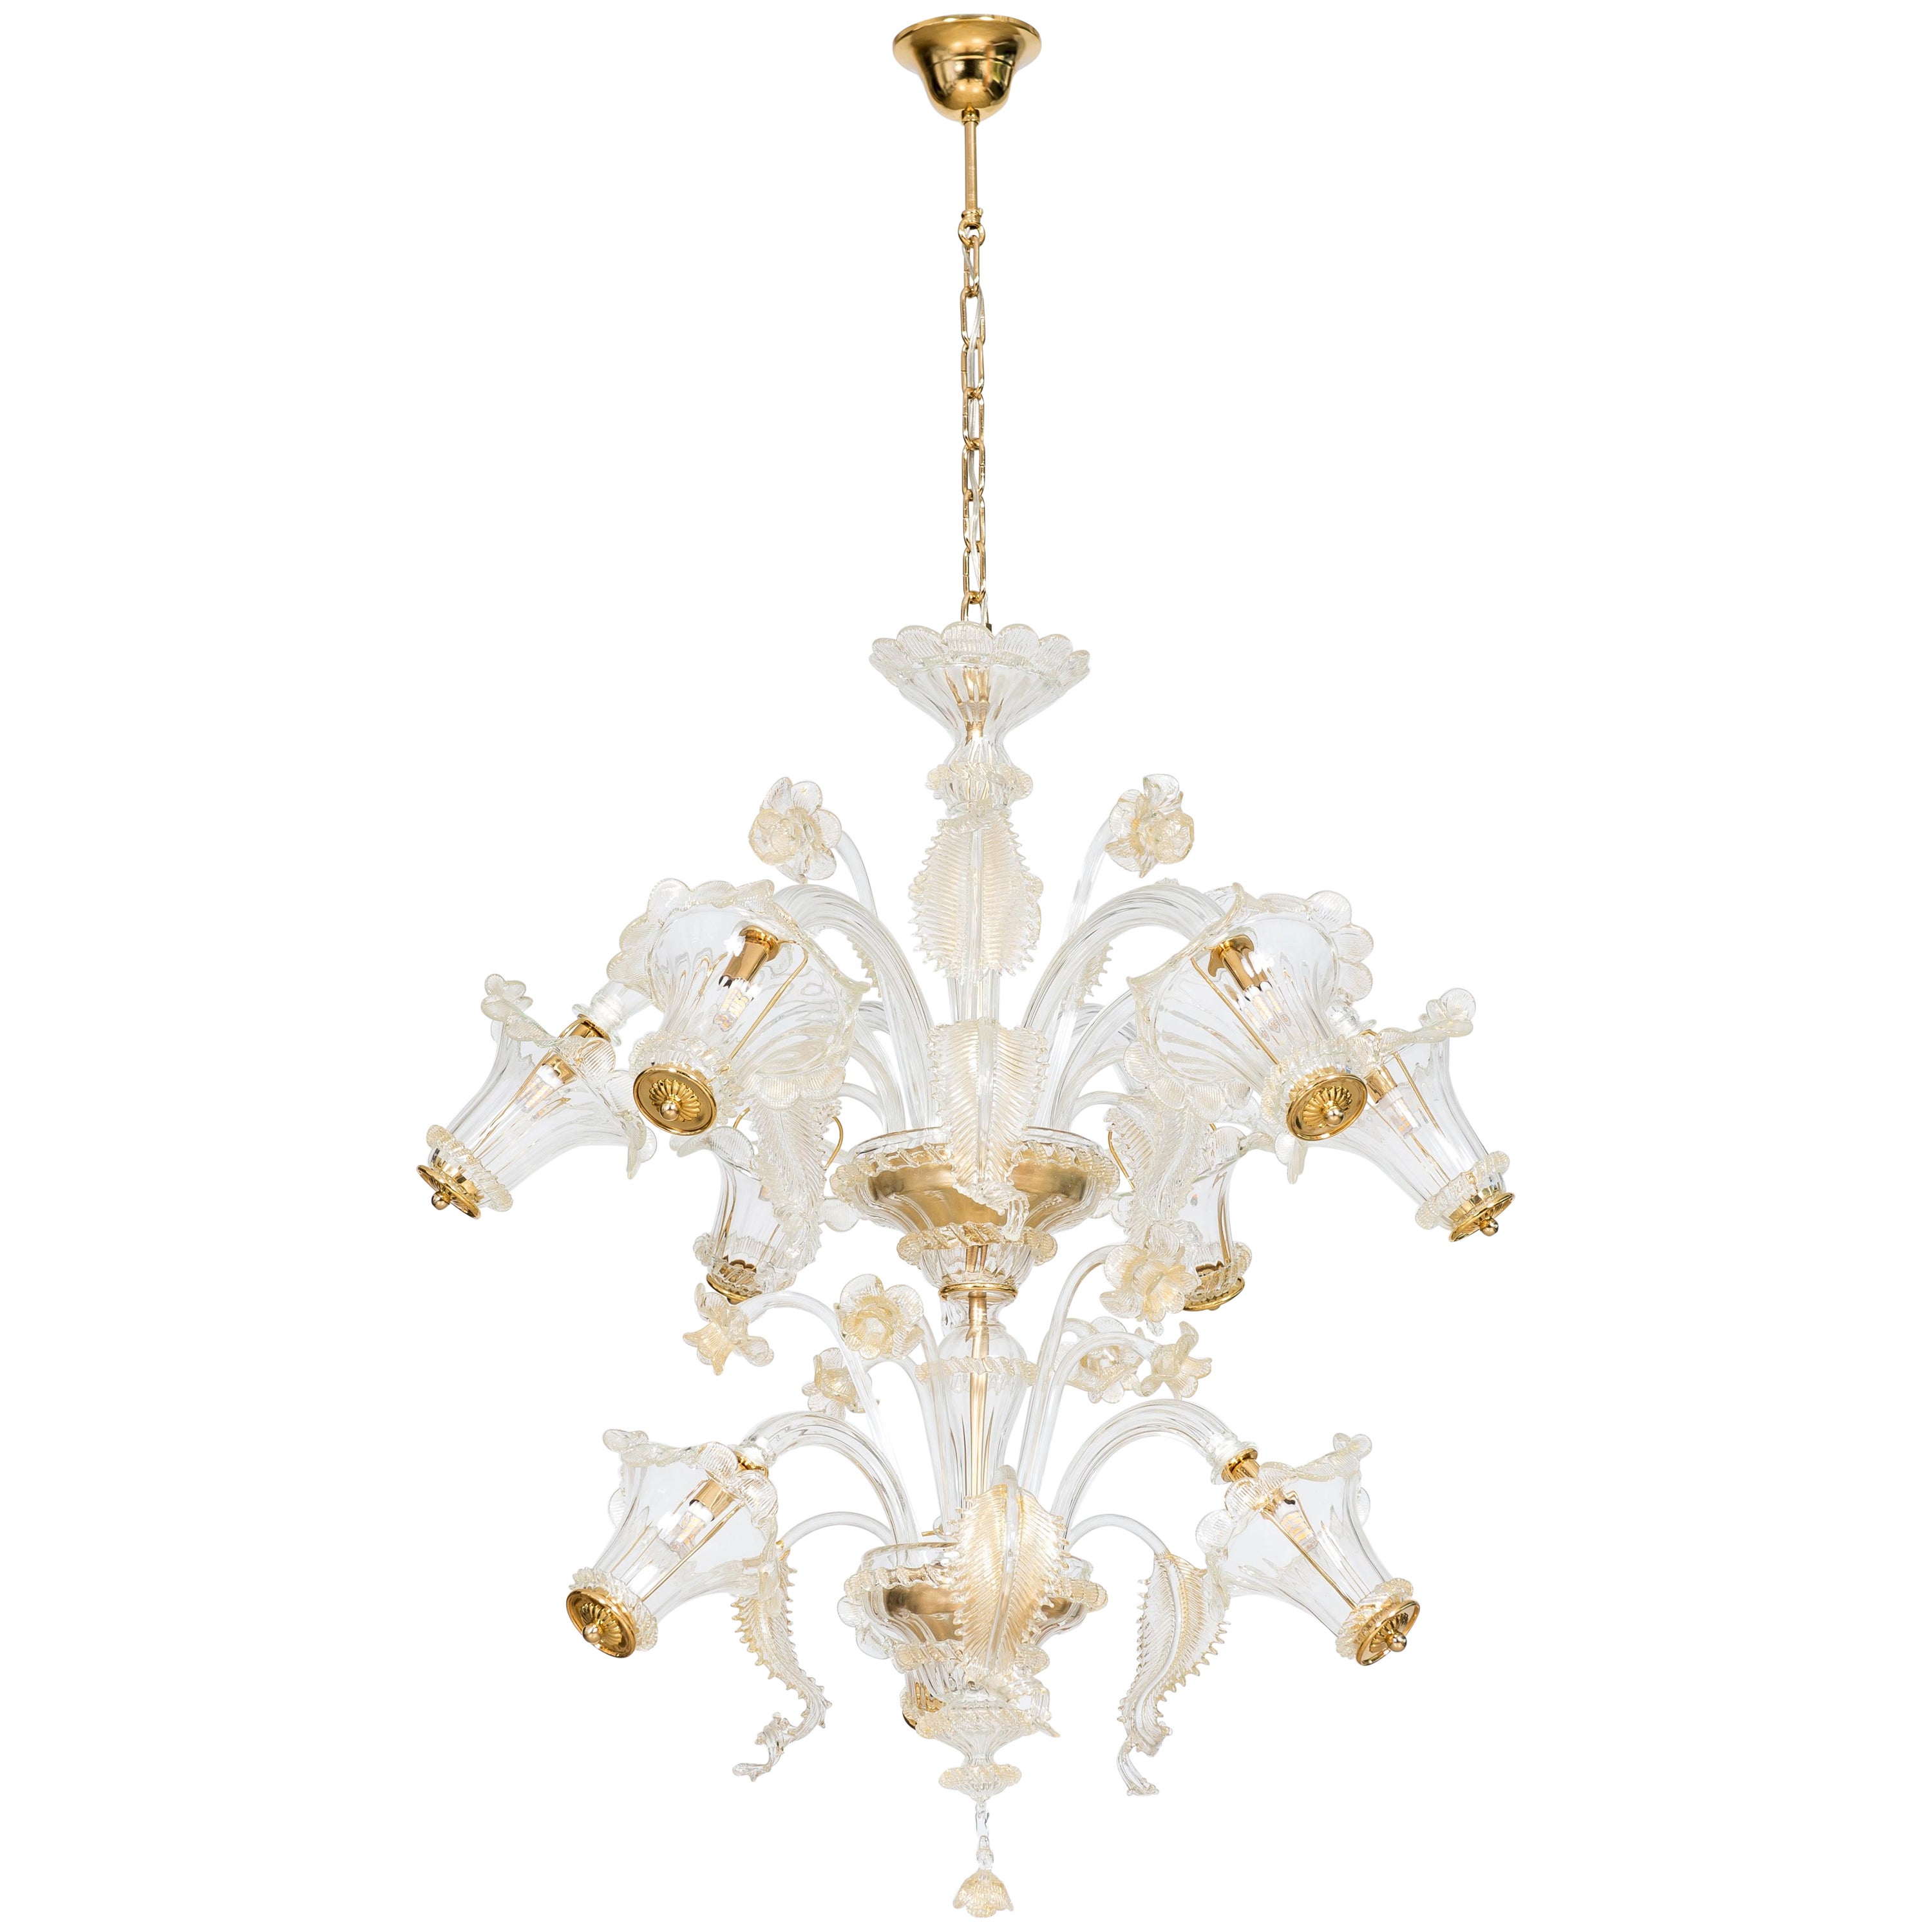 Golden Murano glass chandelier with 9 lights, 21st century, Italy.
This unique chandelier stands out for its beauty, elegance, and the refinement of its details. 
Two refined gardens of transparent and gold-finished leaves and flowers, placed at two